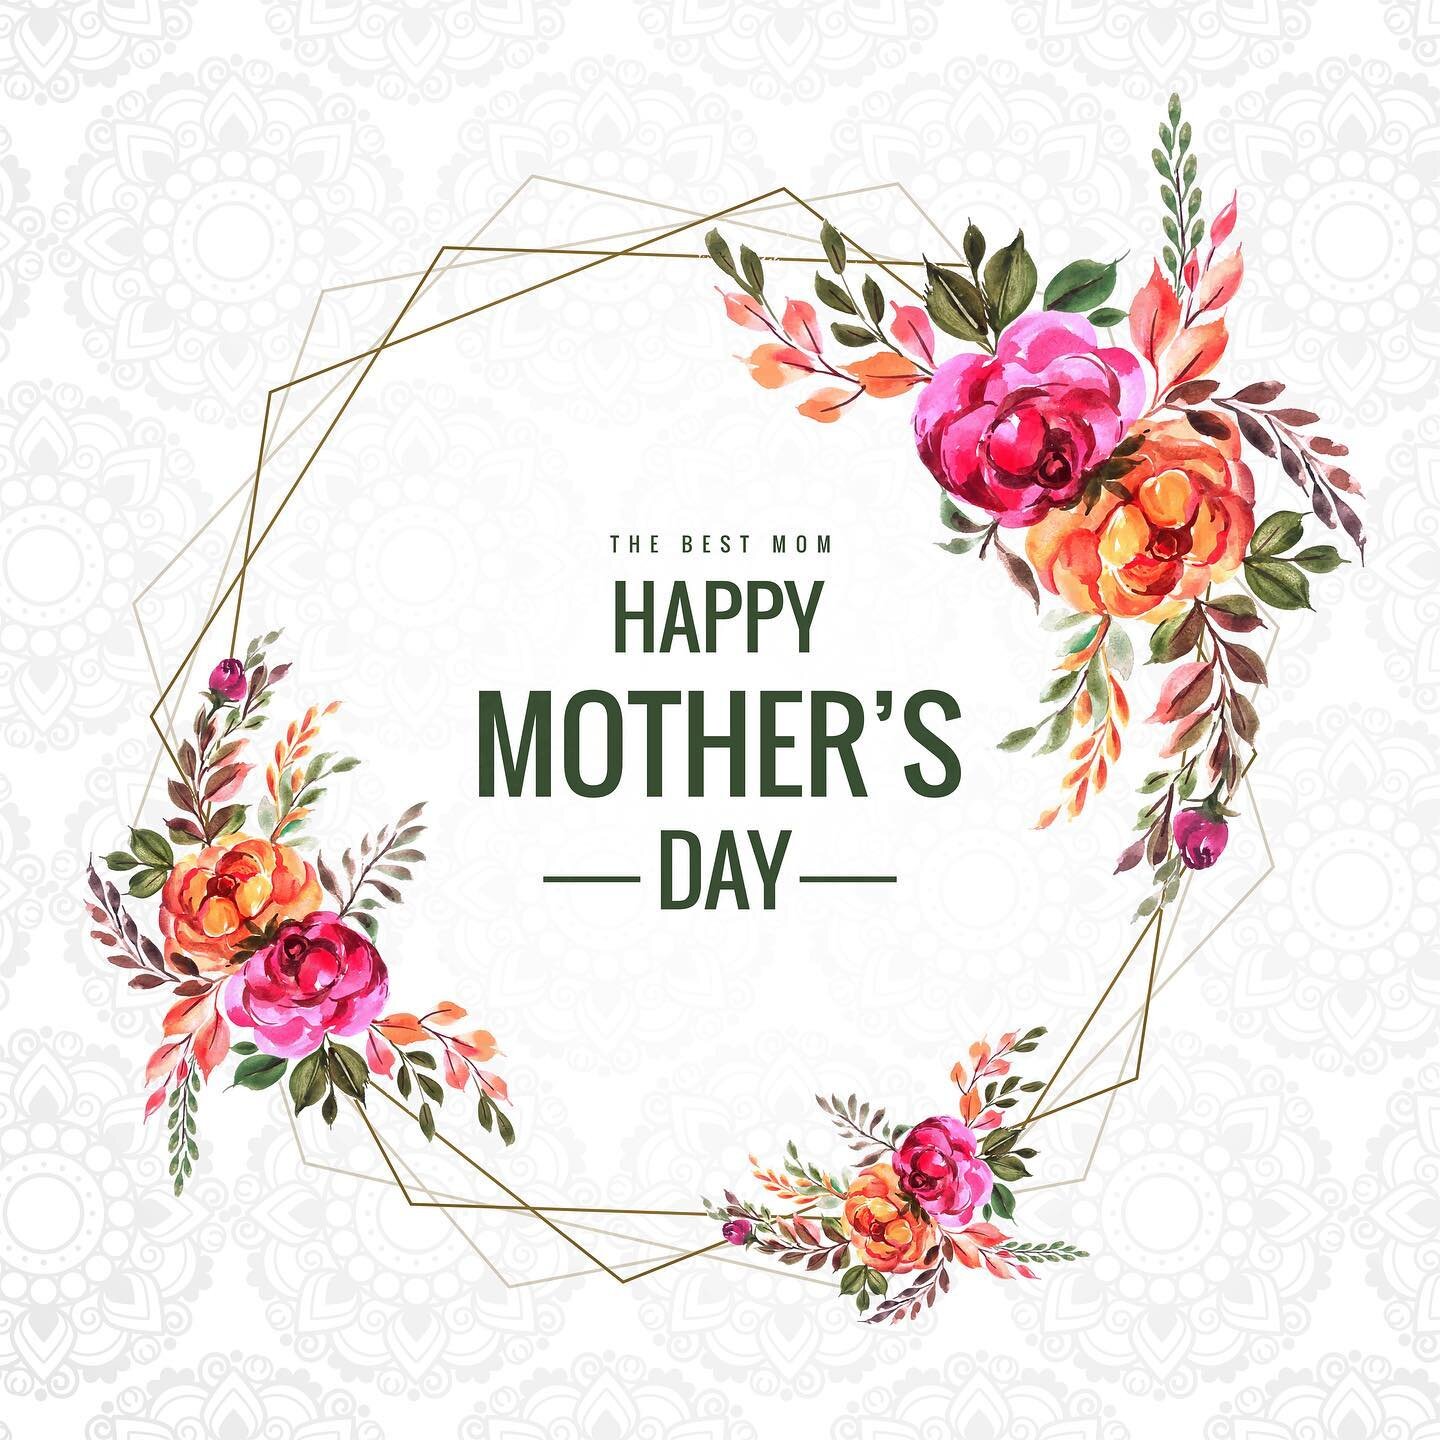 🌸 Happy Mothers Day 🌸

To all the moms out there of all kinds! We love and appreciate you, and hope you have the fabulous day you all deserve 🤍 

#mothersday  #happymothersday #shoplocal #msp #celebratemom #indianabusiness